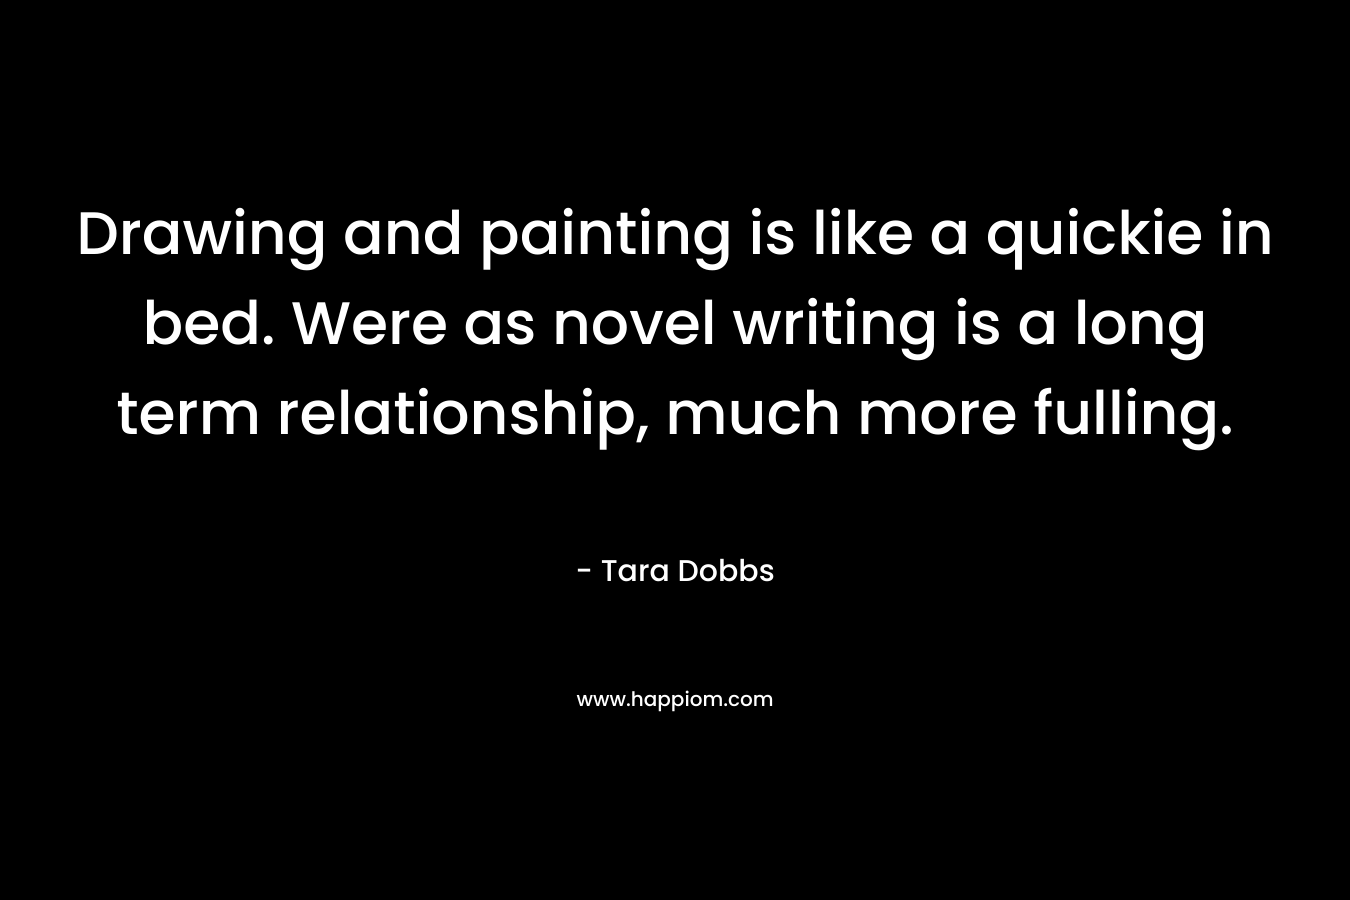 Drawing and painting is like a quickie in bed. Were as novel writing is a long term relationship, much more fulling.